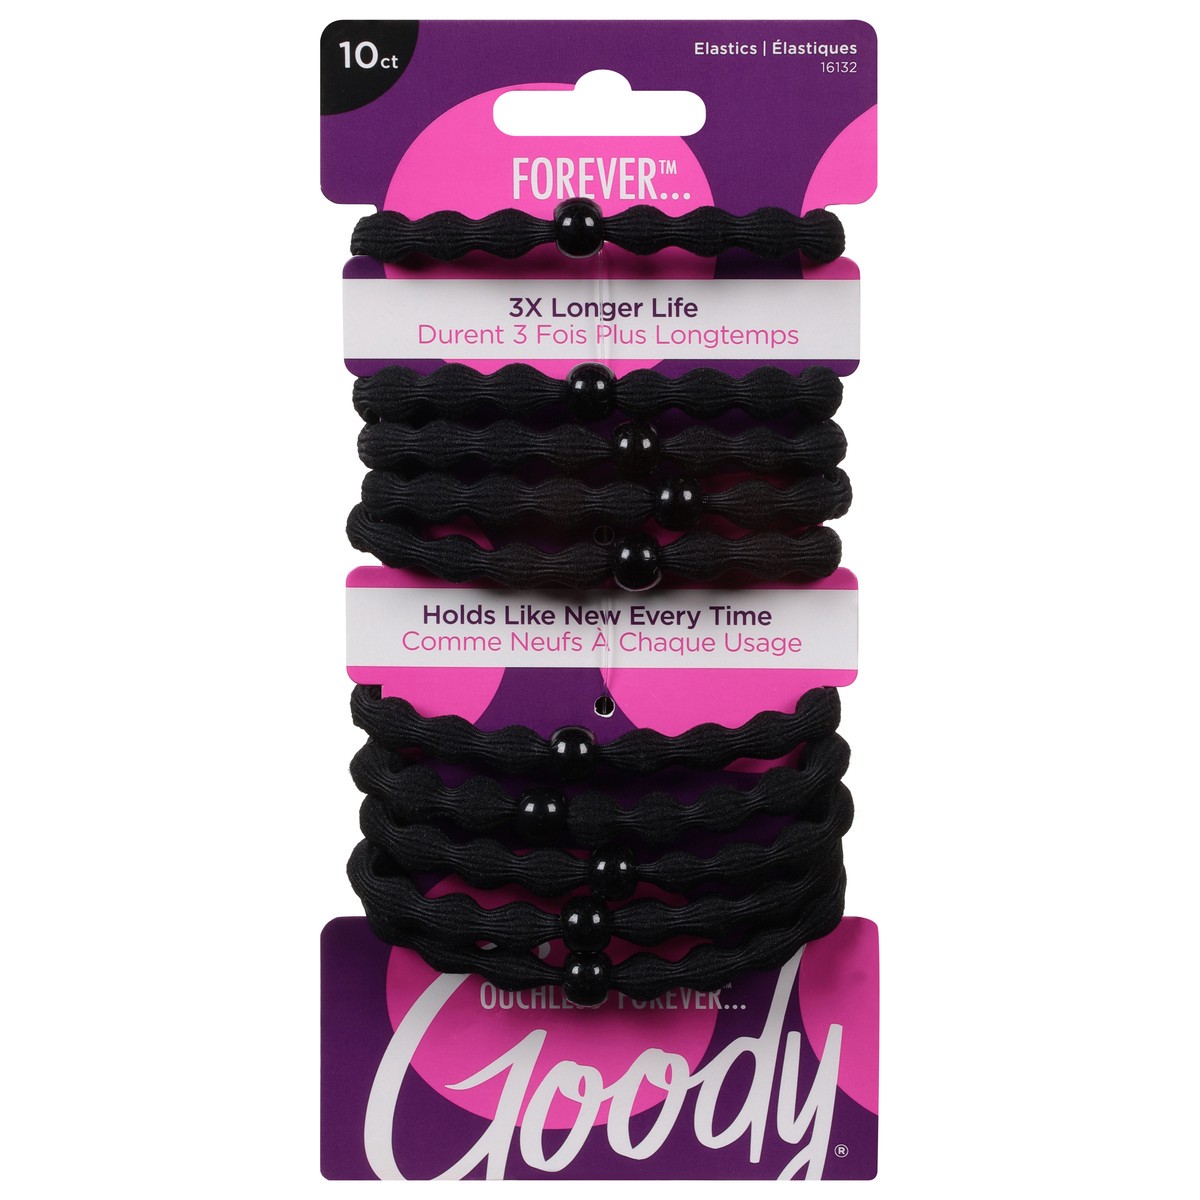 slide 1 of 9, Goody Ouchless Forever Elastics 10 ea, 10 ct